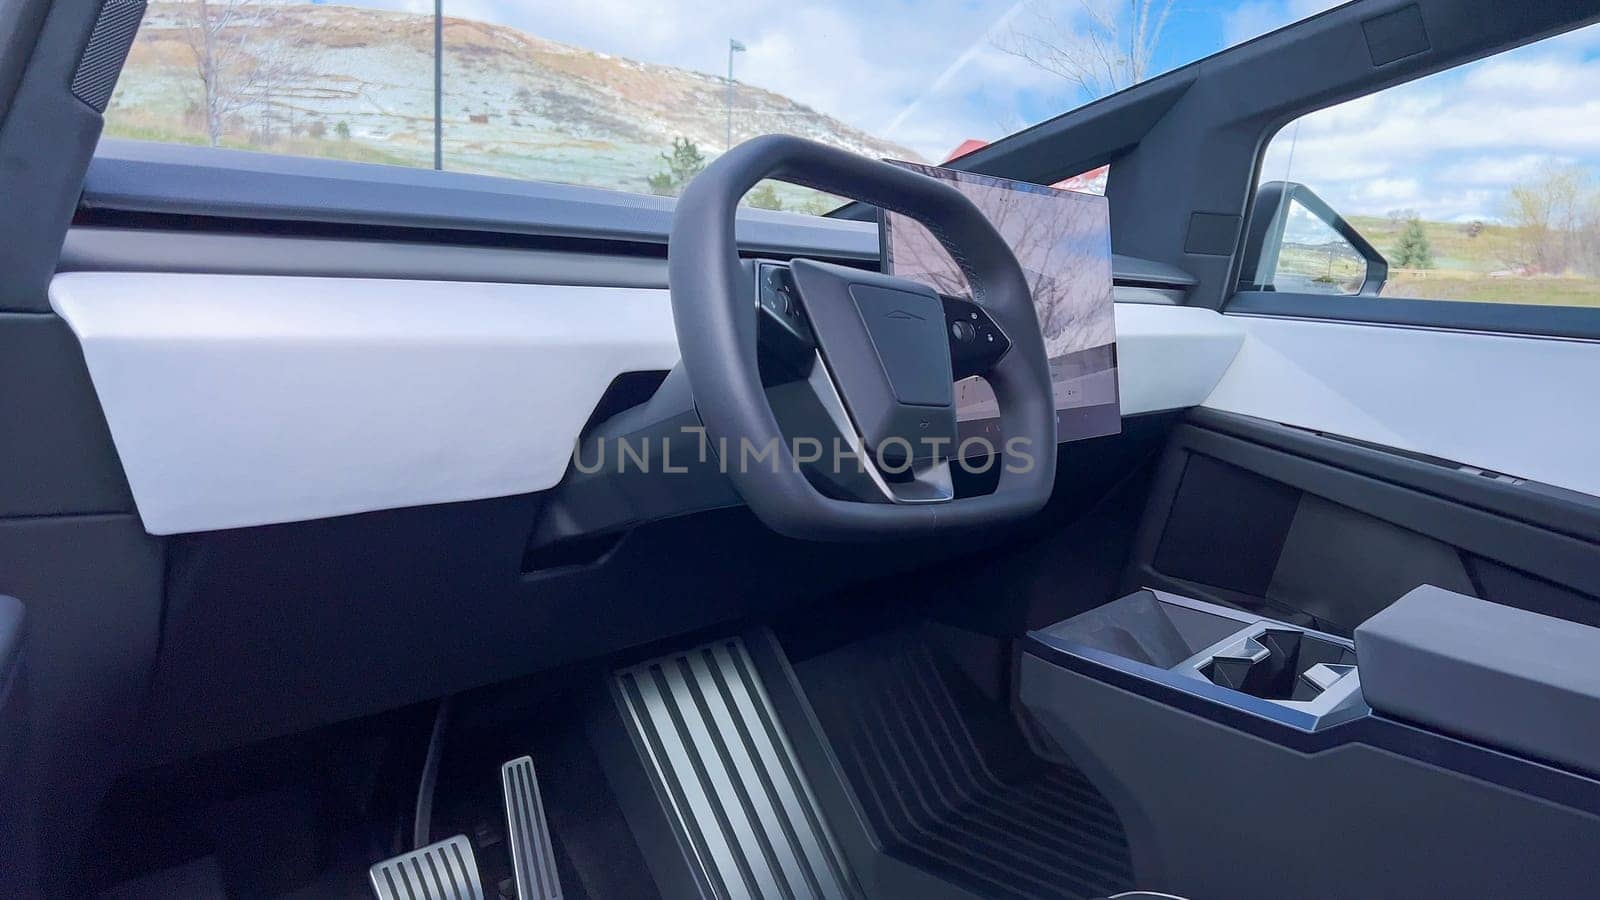 Inside the Tesla Cybertruck: A View from the Driver Seat by arinahabich